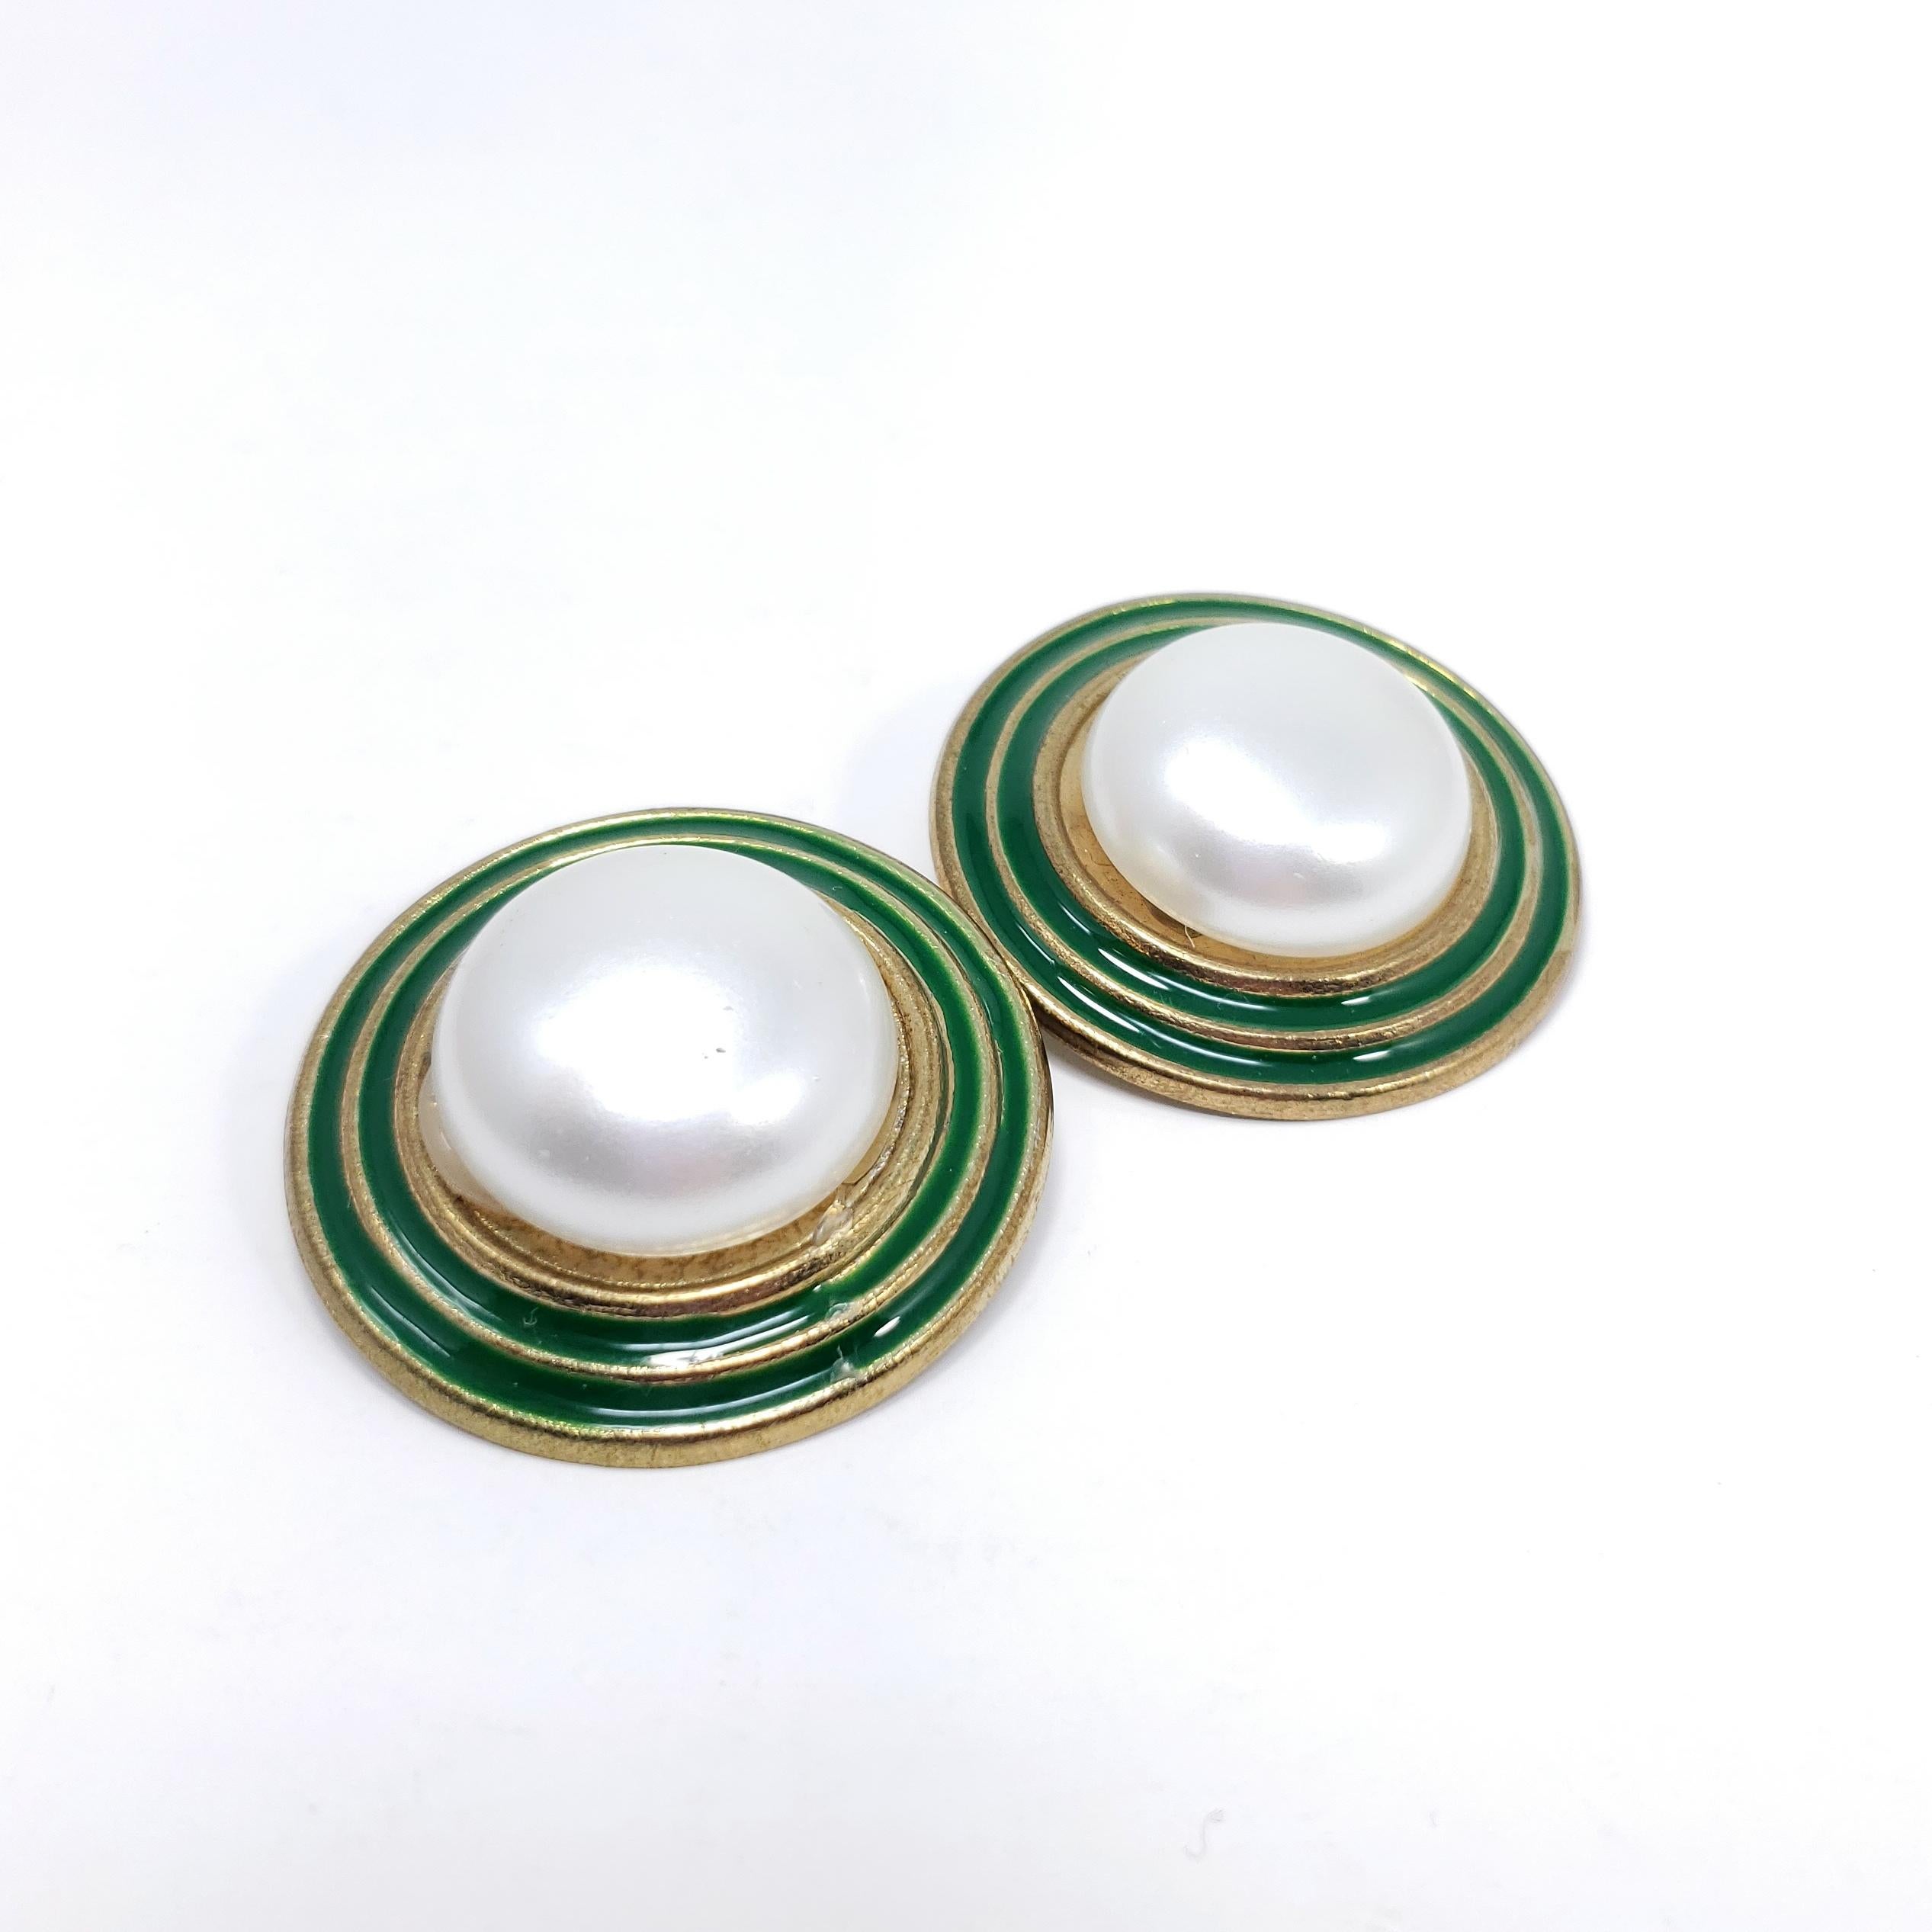 Big and bold, a pair of chunky retro clip on earrings. A delightful retro accessory!

Green enamel and faux pearl center cabochon.

Late 1900s.